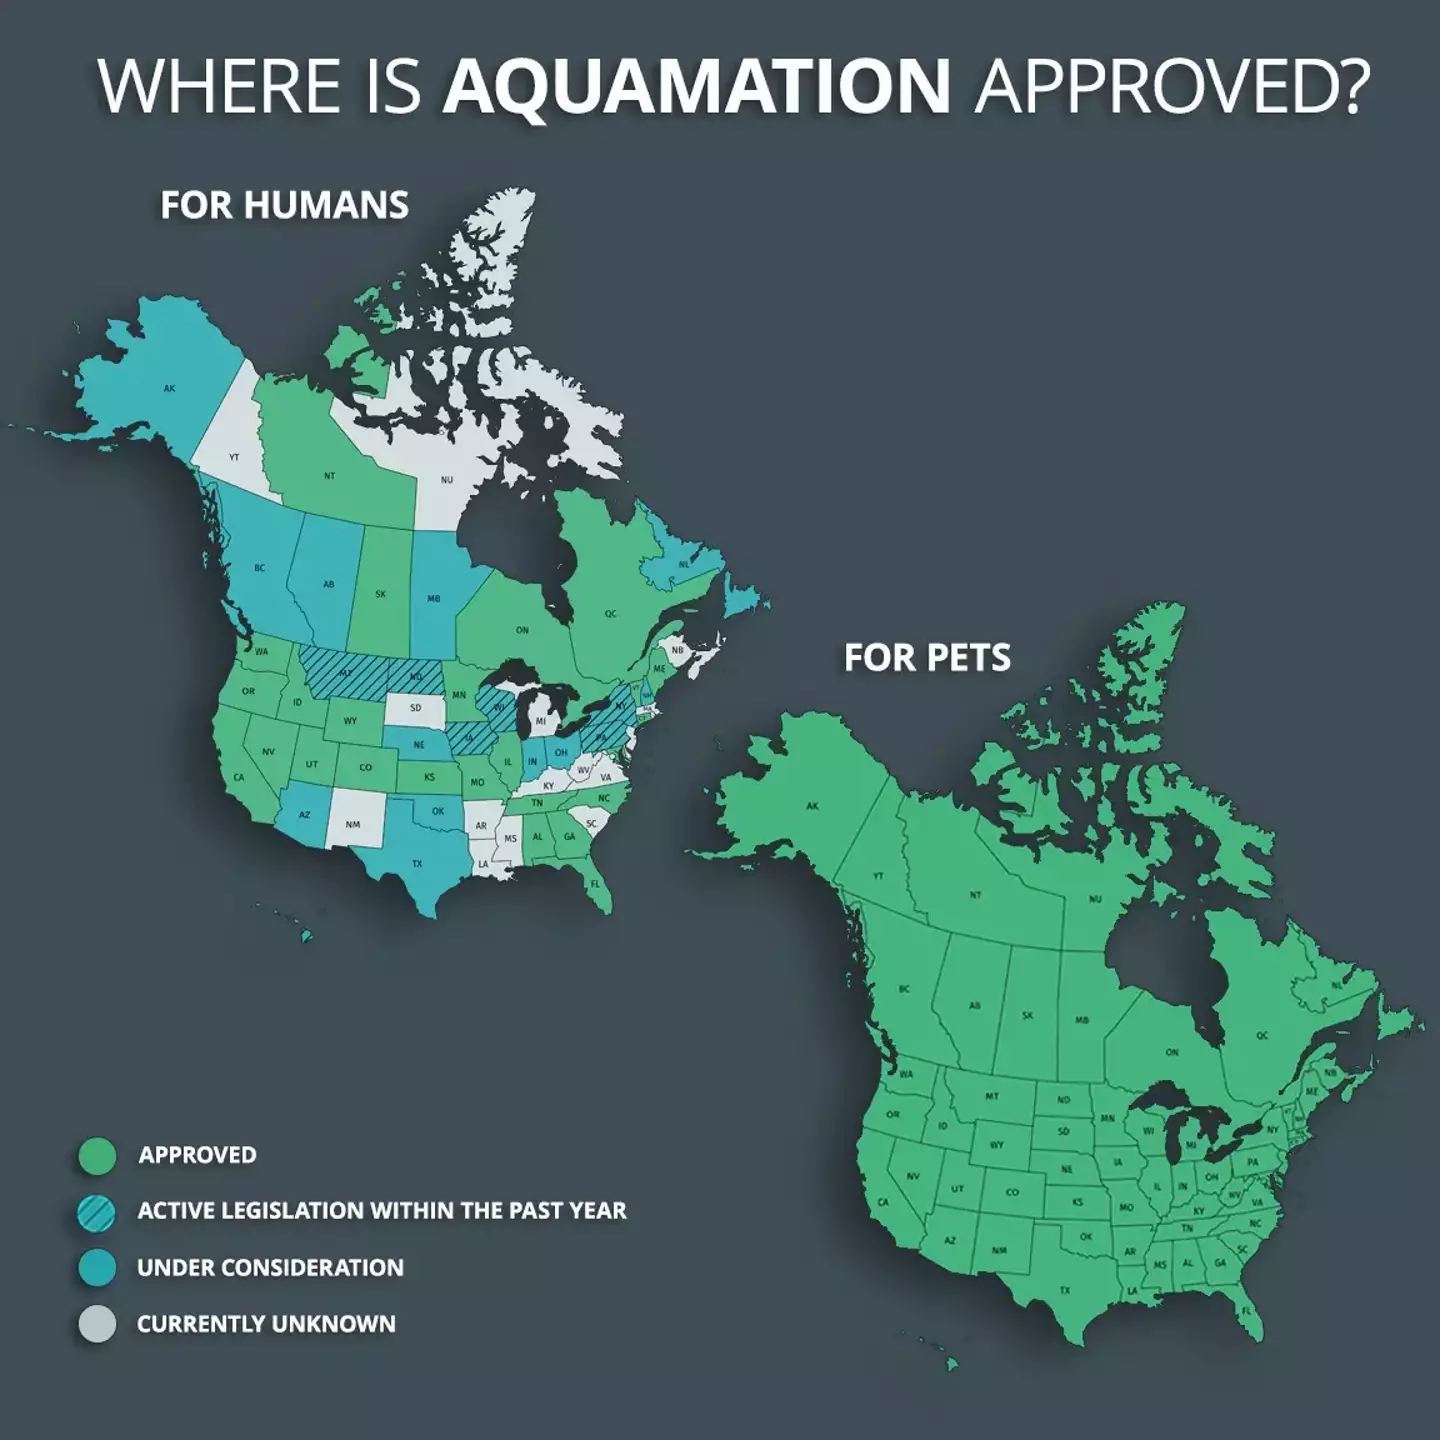 Aquamation for humans is currently approved in 21 selected American states.